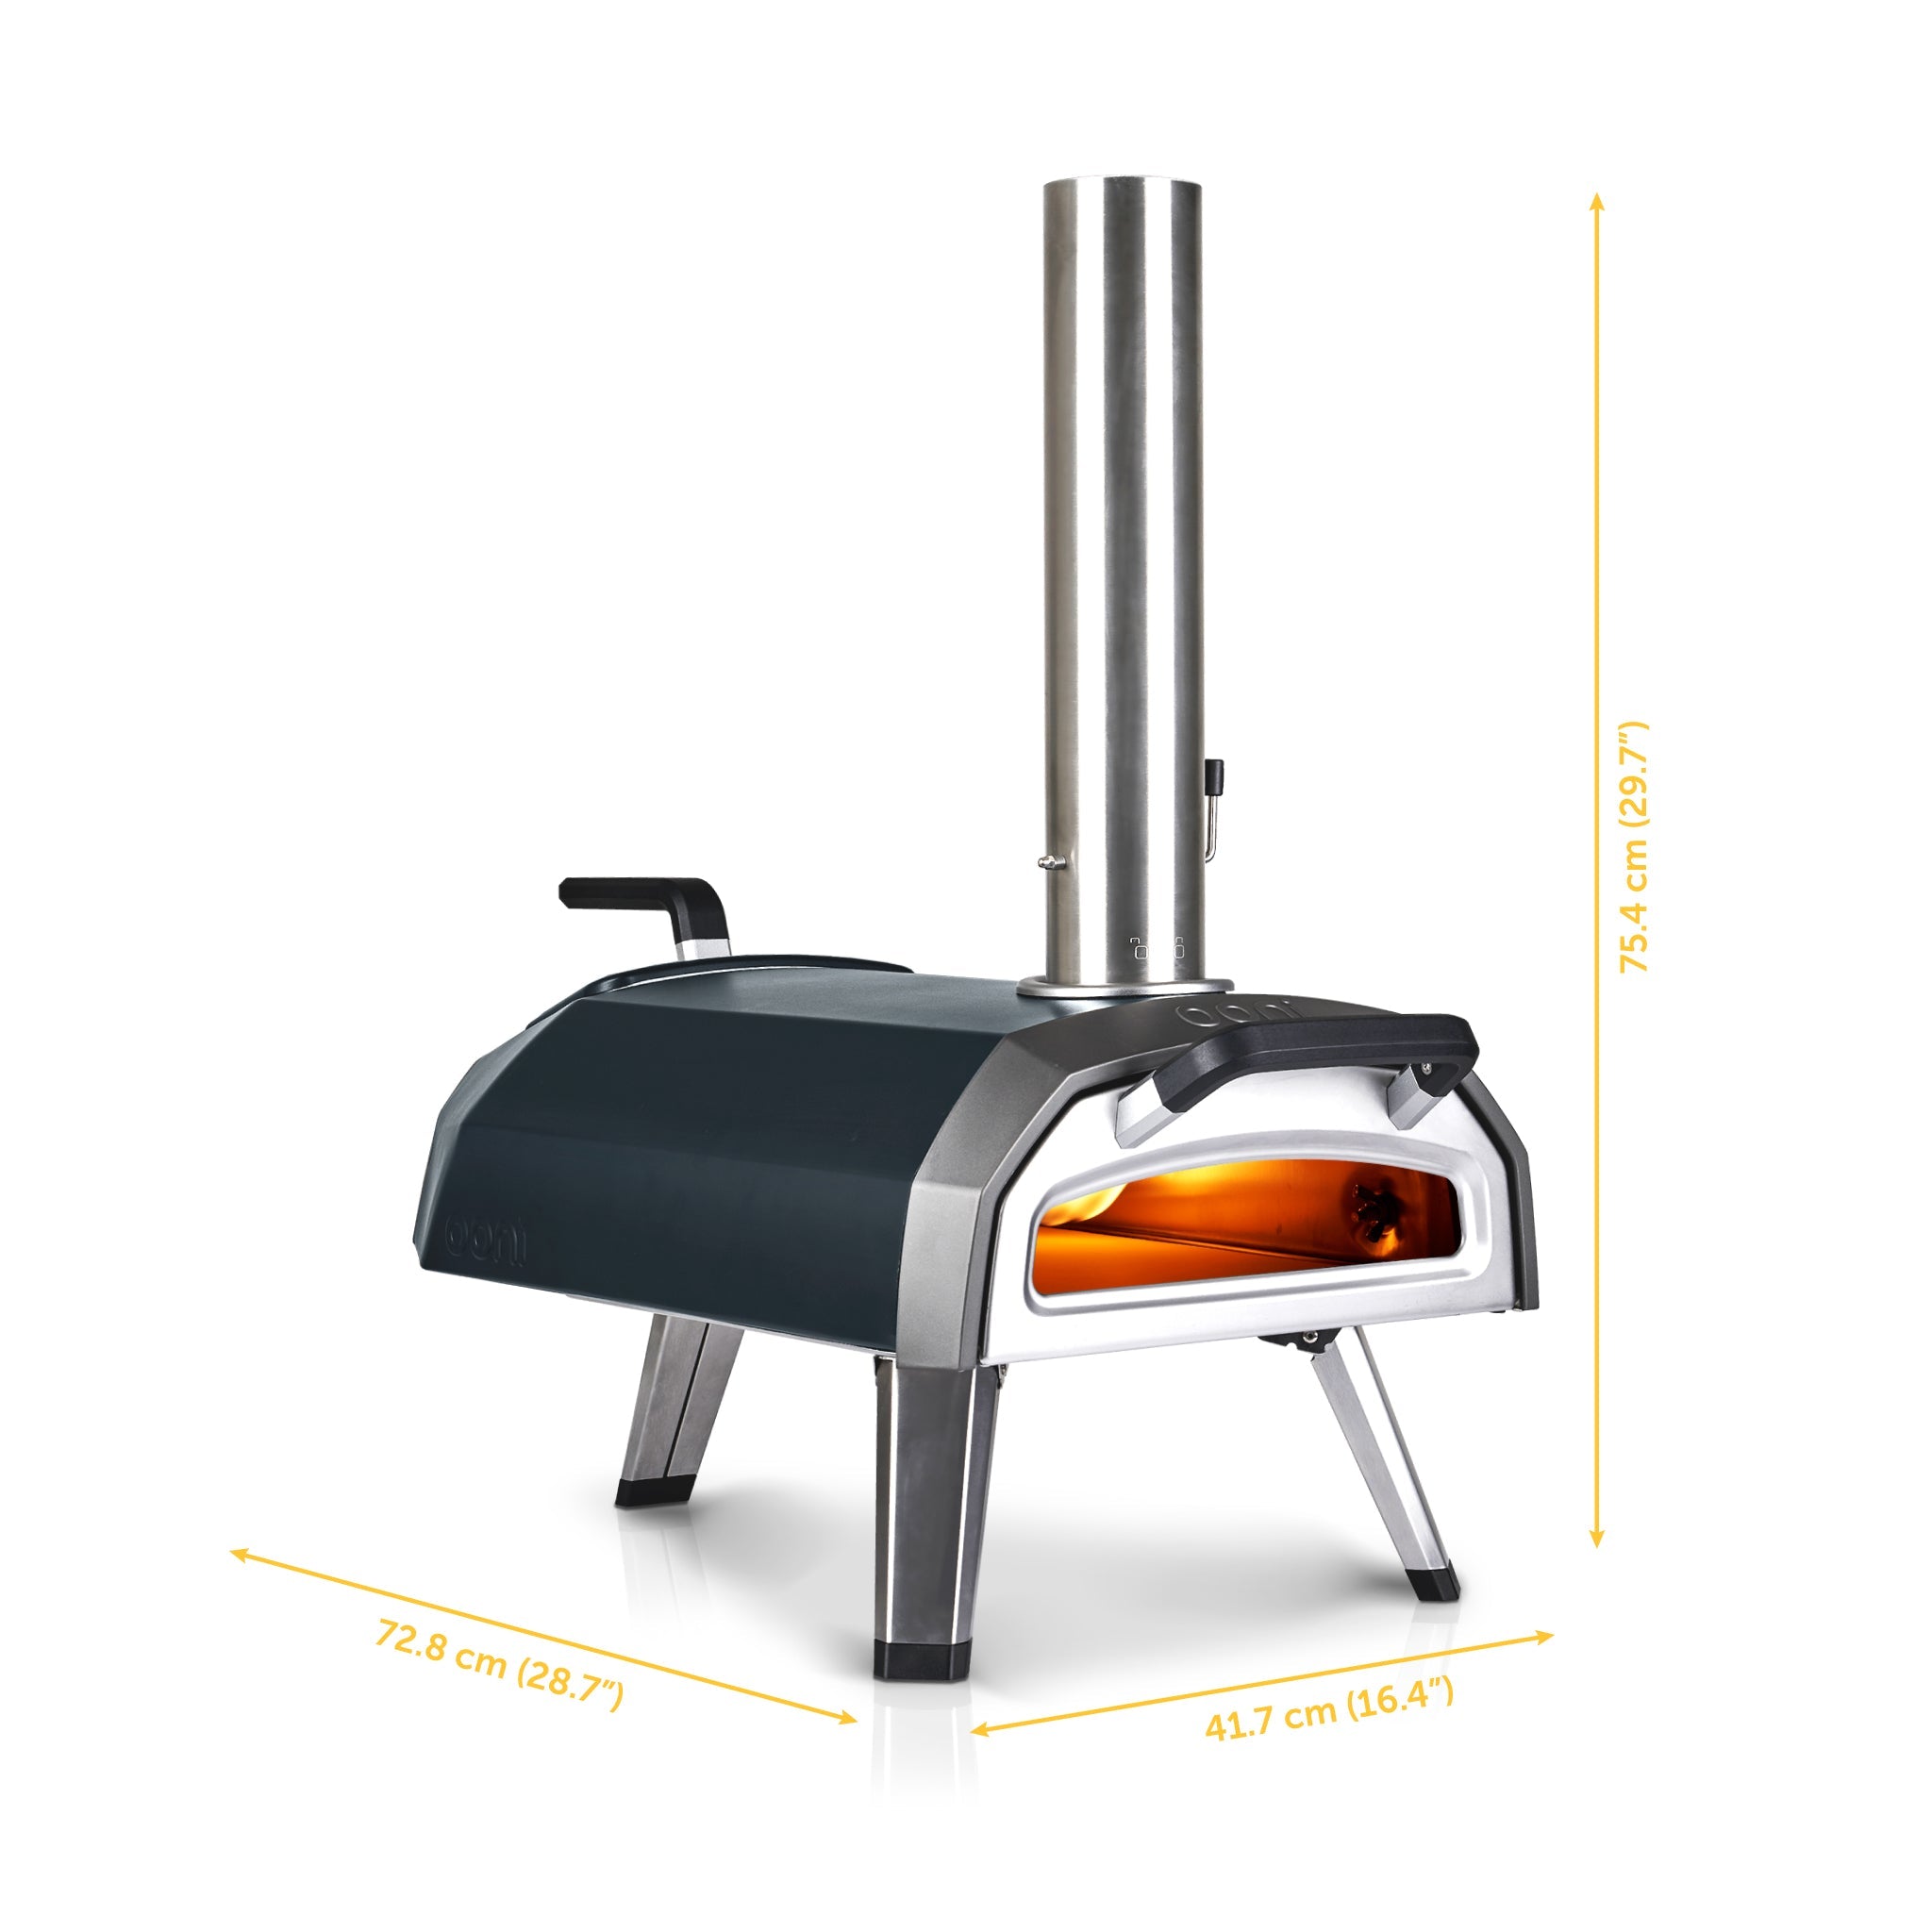 Ooni Karu 12G Portable Multi-Fuel Outdoor Pizza Oven